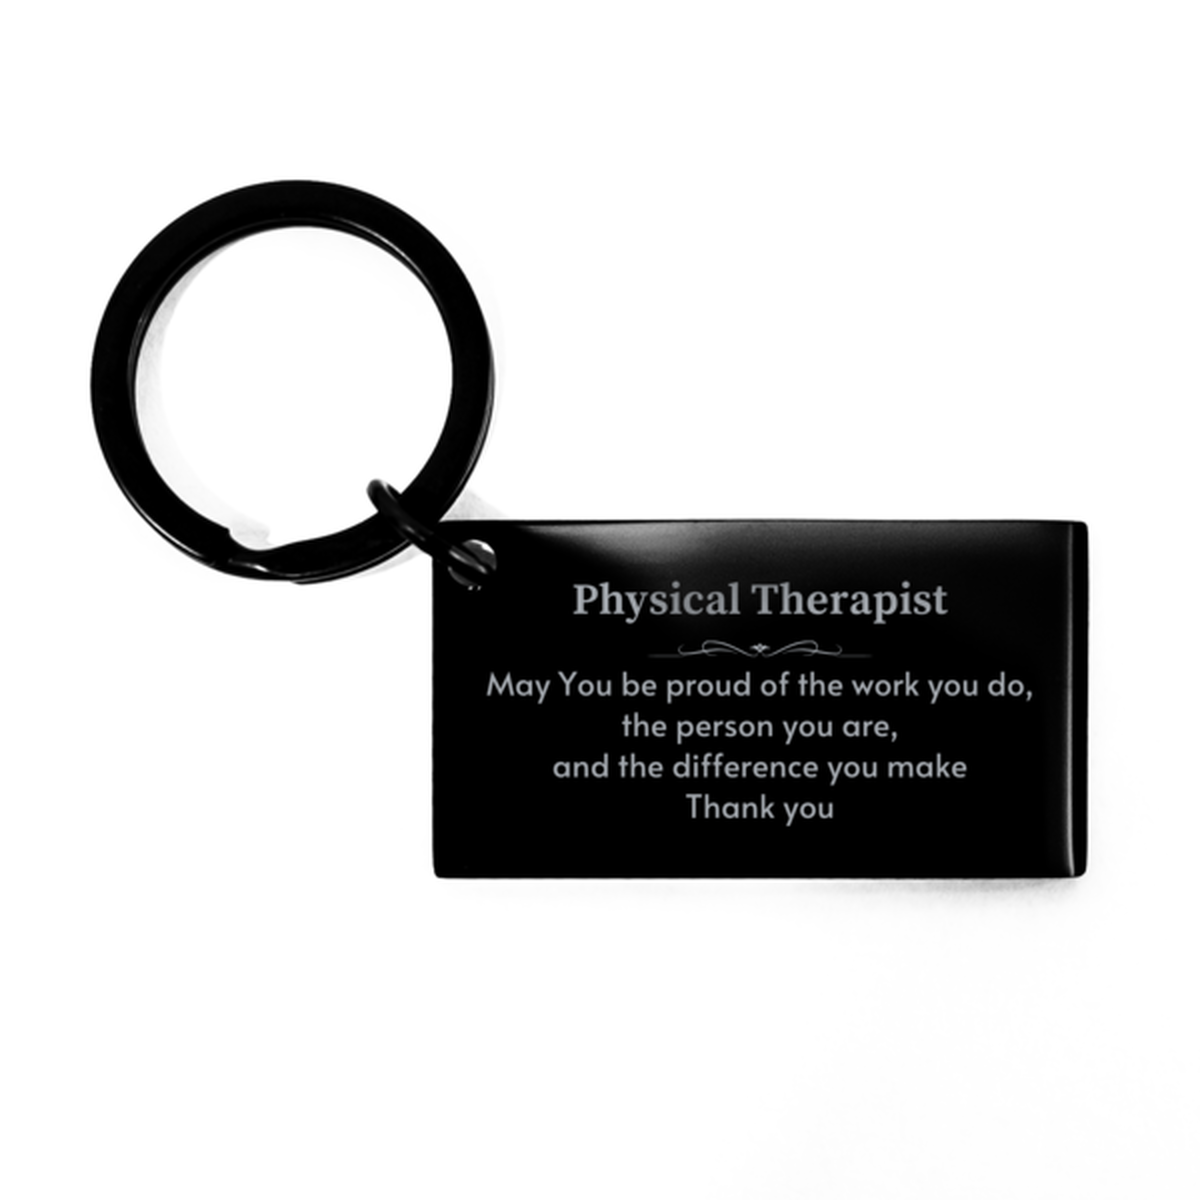 Heartwarming Keychain Retirement Coworkers Gifts for Physical Therapist, Sales Manager May You be proud of the work you do, the person you are Gifts for Boss Men Women Friends